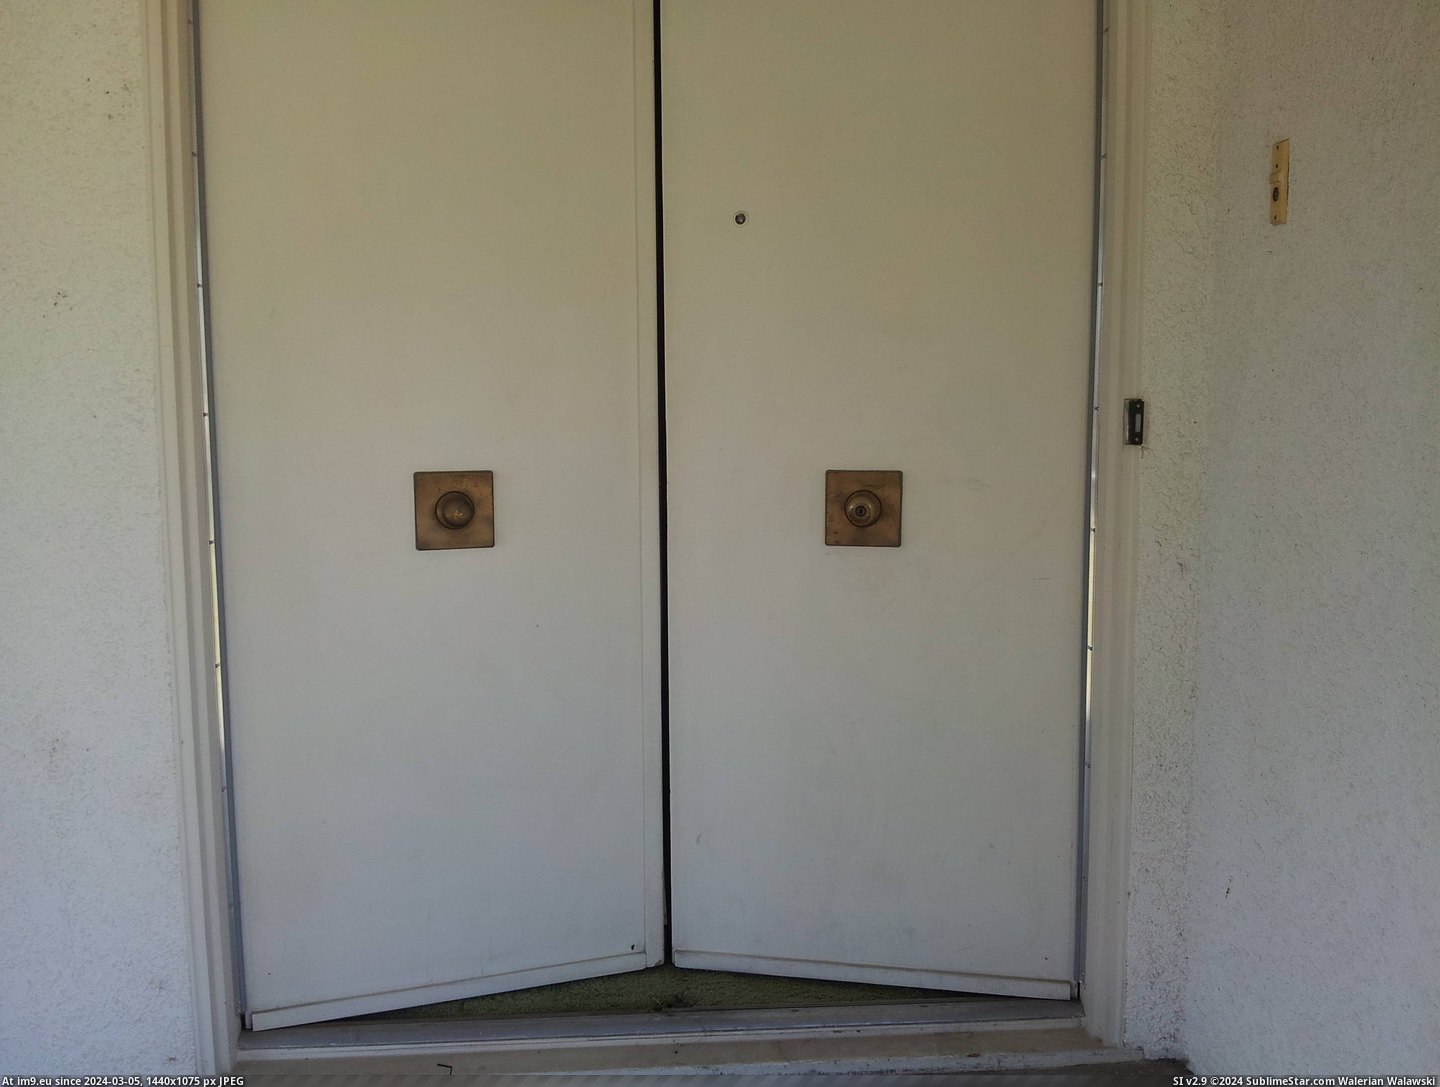 #Sister #House #Knobs #Door #Moved [Mildlyinteresting] My sister just moved into a house with door knobs in the middle of the door. 1 Pic. (Obraz z album My r/MILDLYINTERESTING favs))